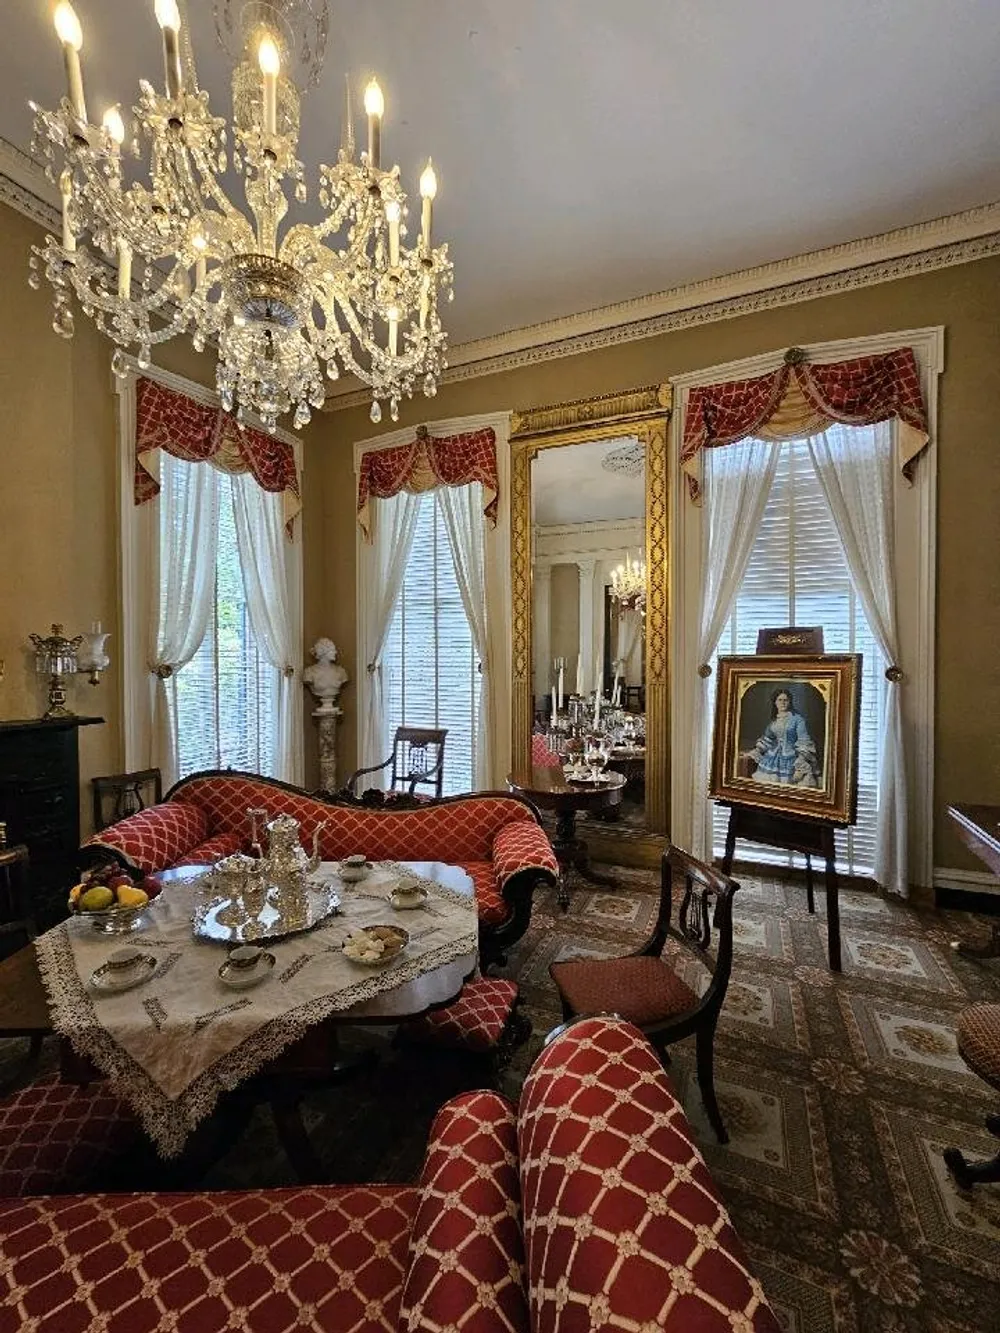 An elegant traditional drawing room featuring a crystal chandelier patterned furniture and classical curtains with a portrait prominently displayed